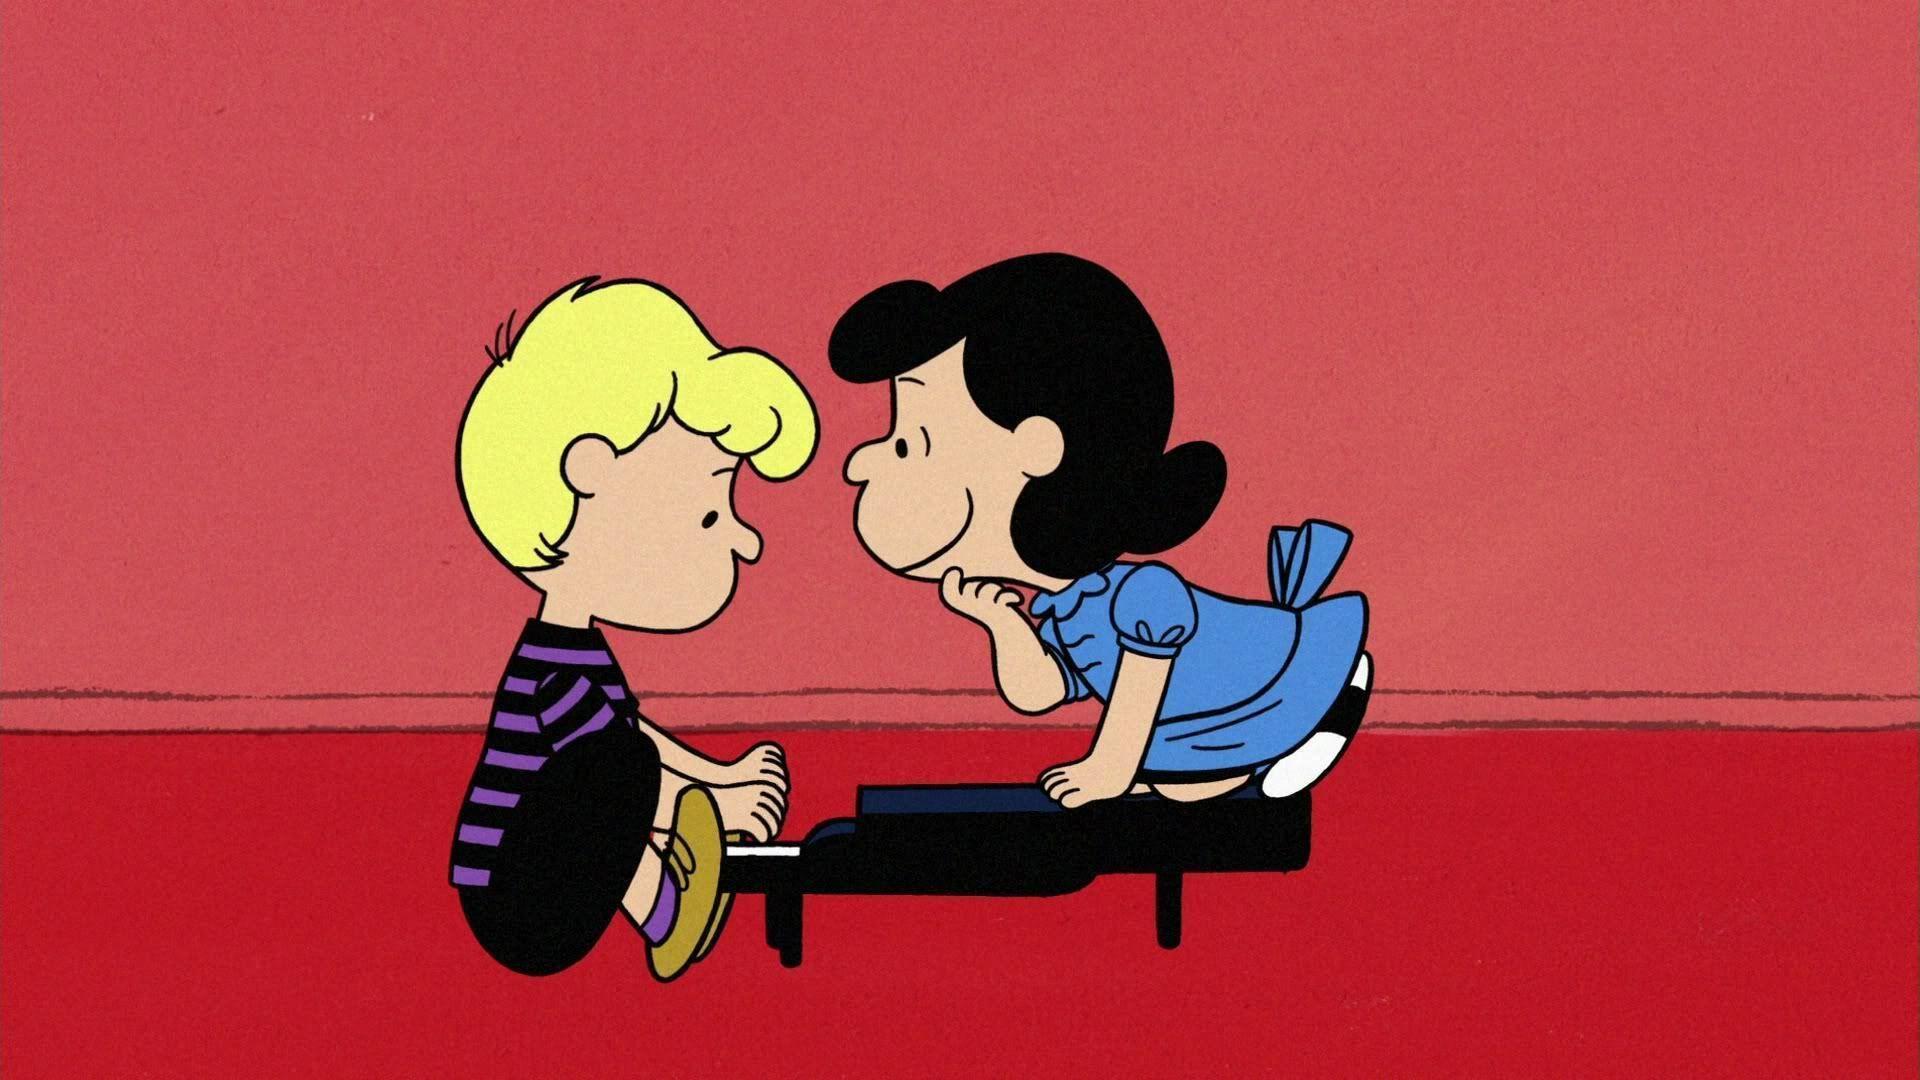 Image For > Peanuts Characters Marcie